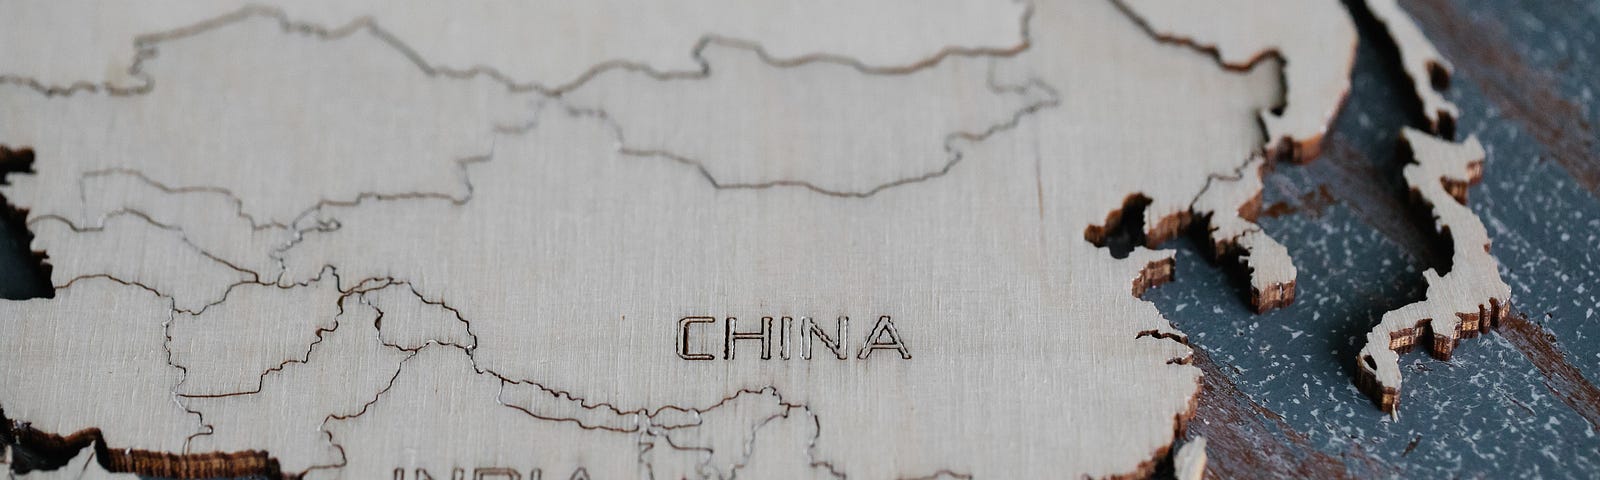 wooden map of Asia but only India and China are labeled